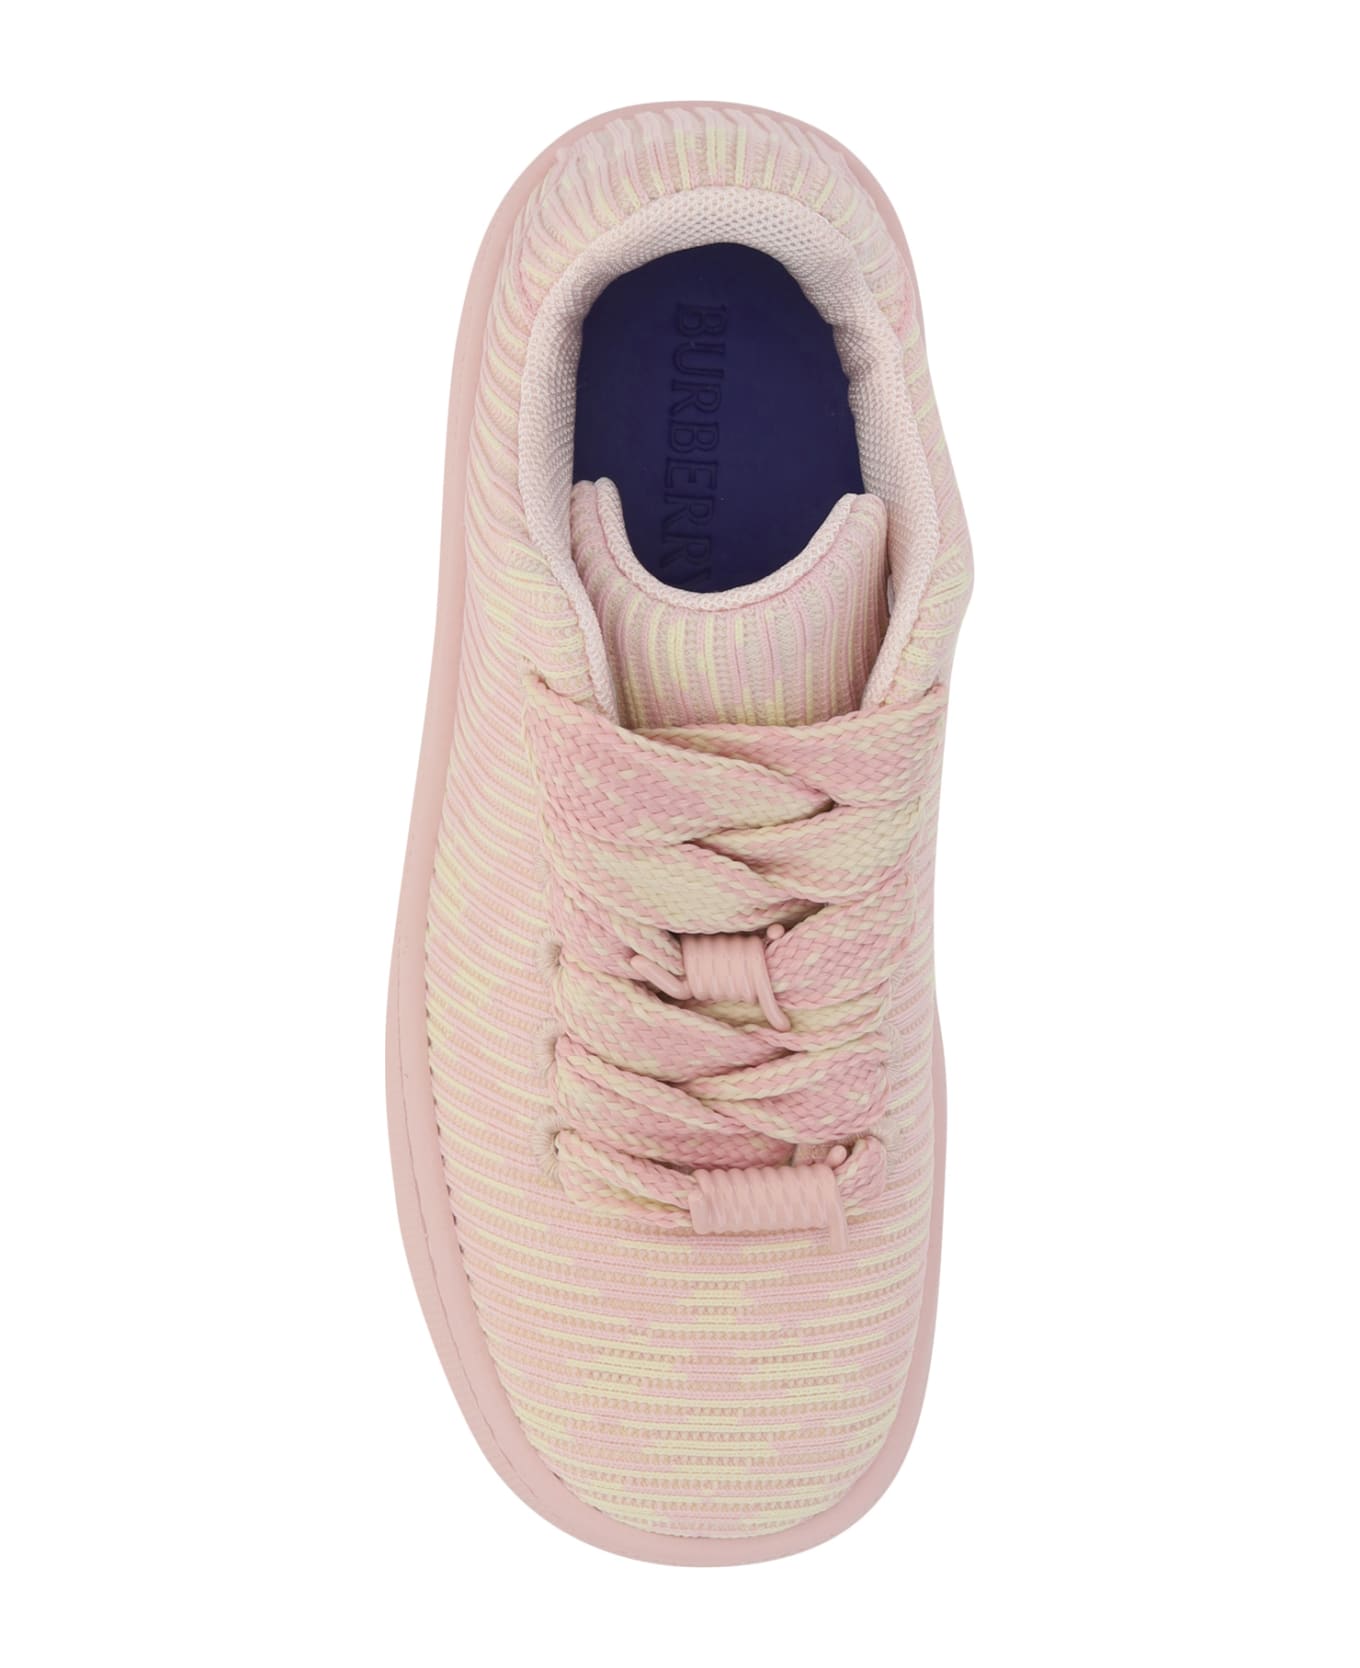 Burberry Embroidered Fabric Box Sneakers - Cameo Ip Check